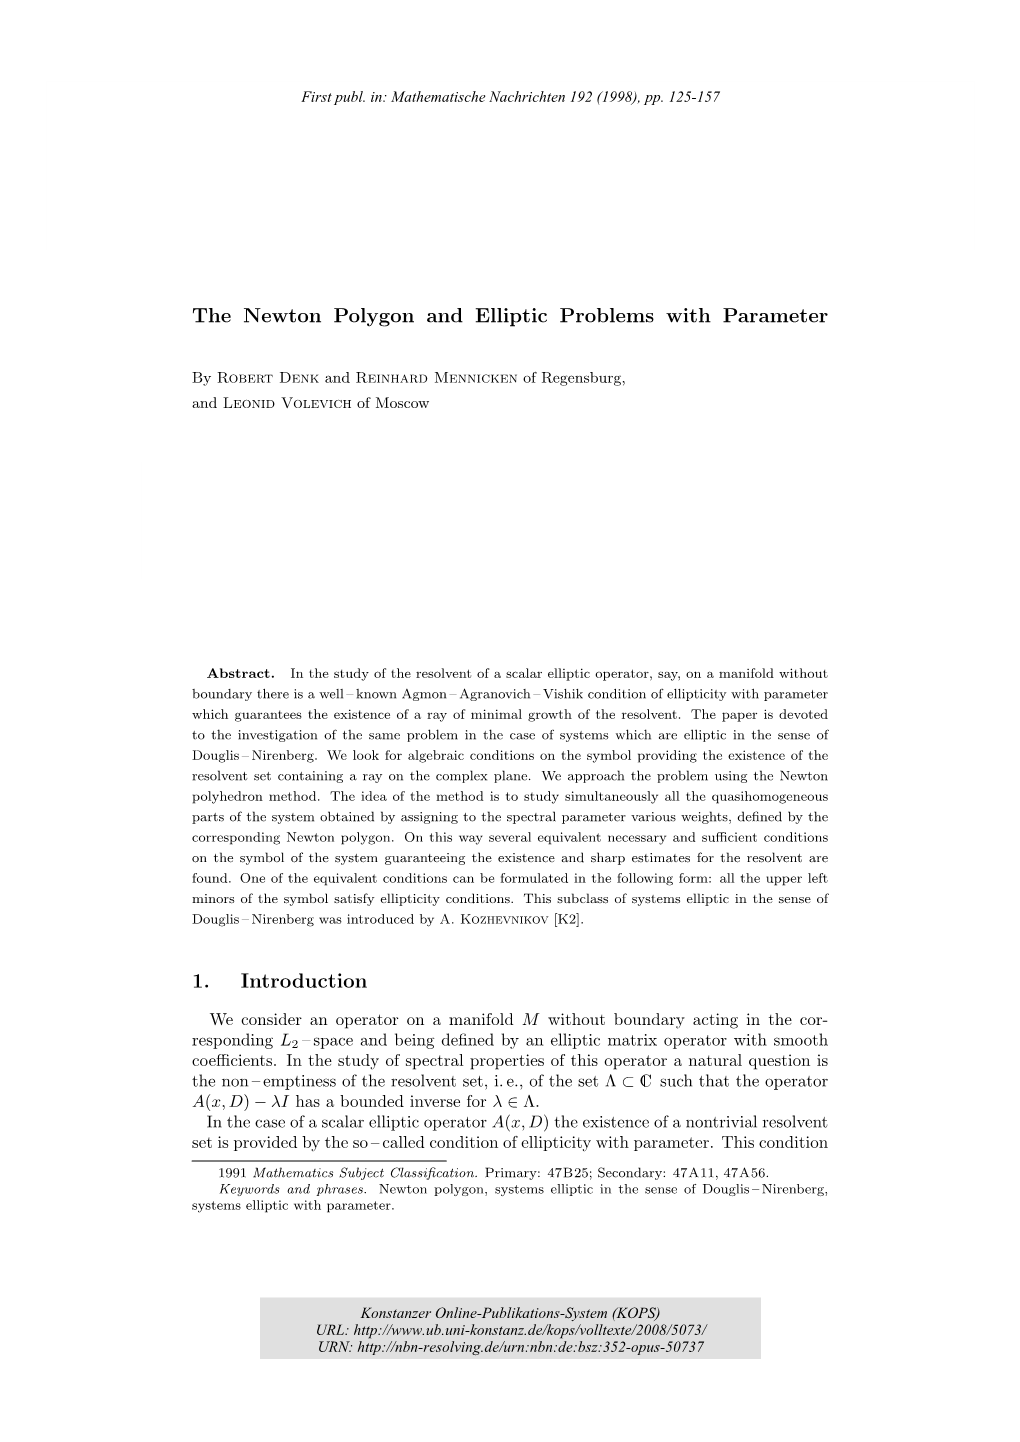 The Newton Polygon and Elliptic Problems with Parameter